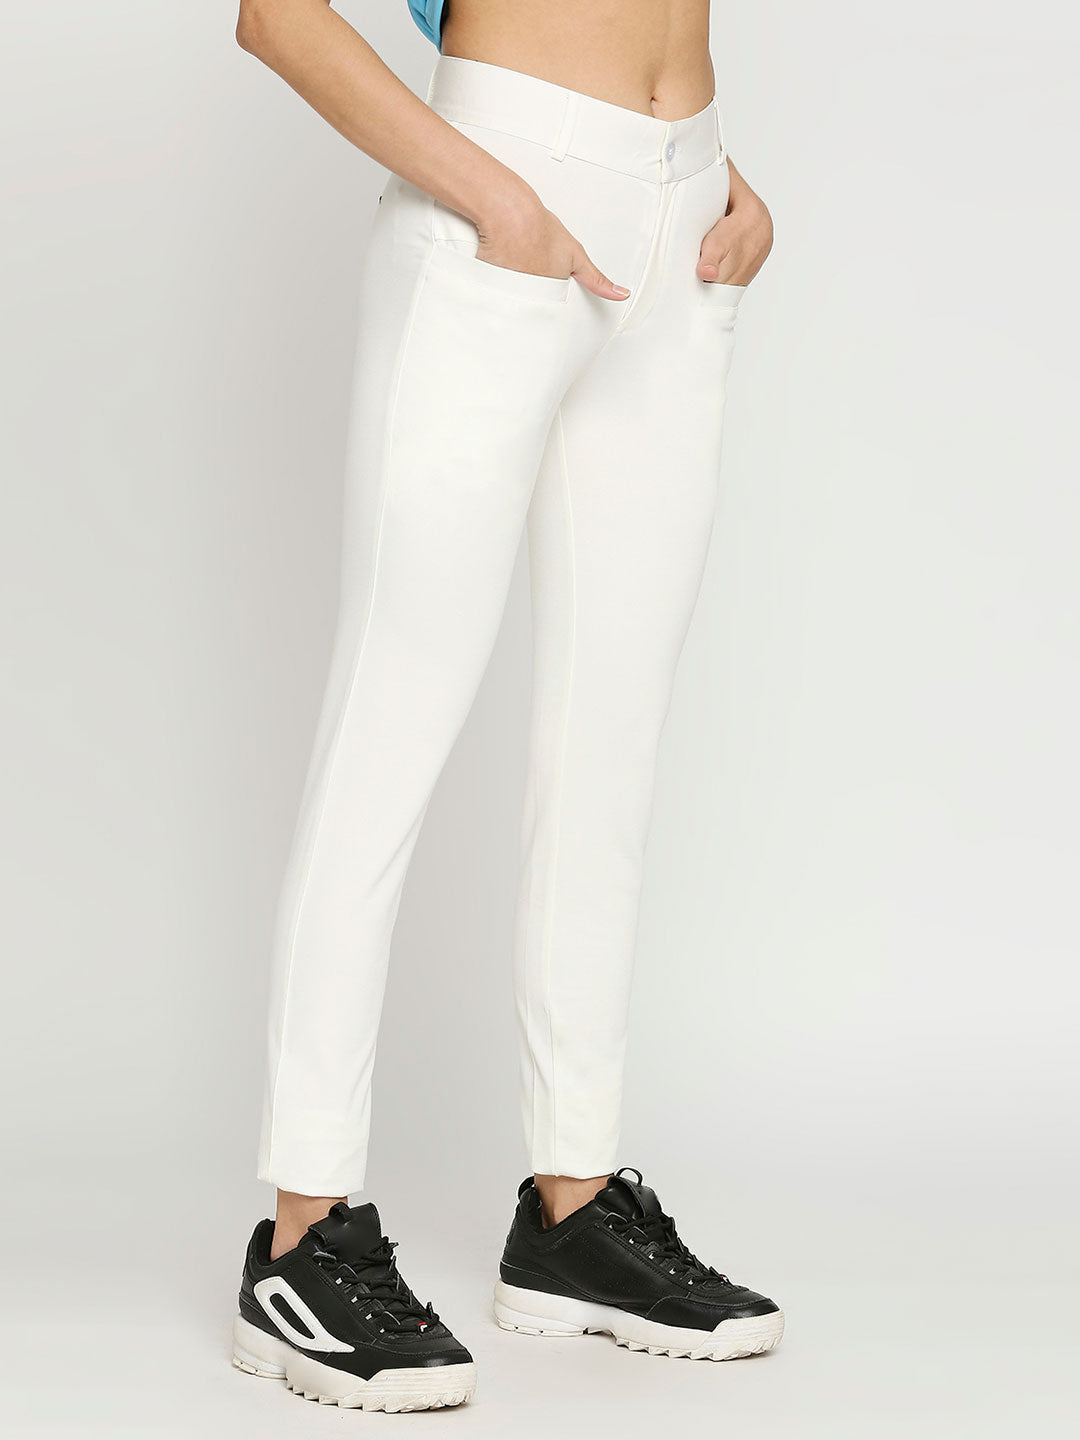 Women's White Golf Pants with Welt Pockets - Stylish and Comfortable